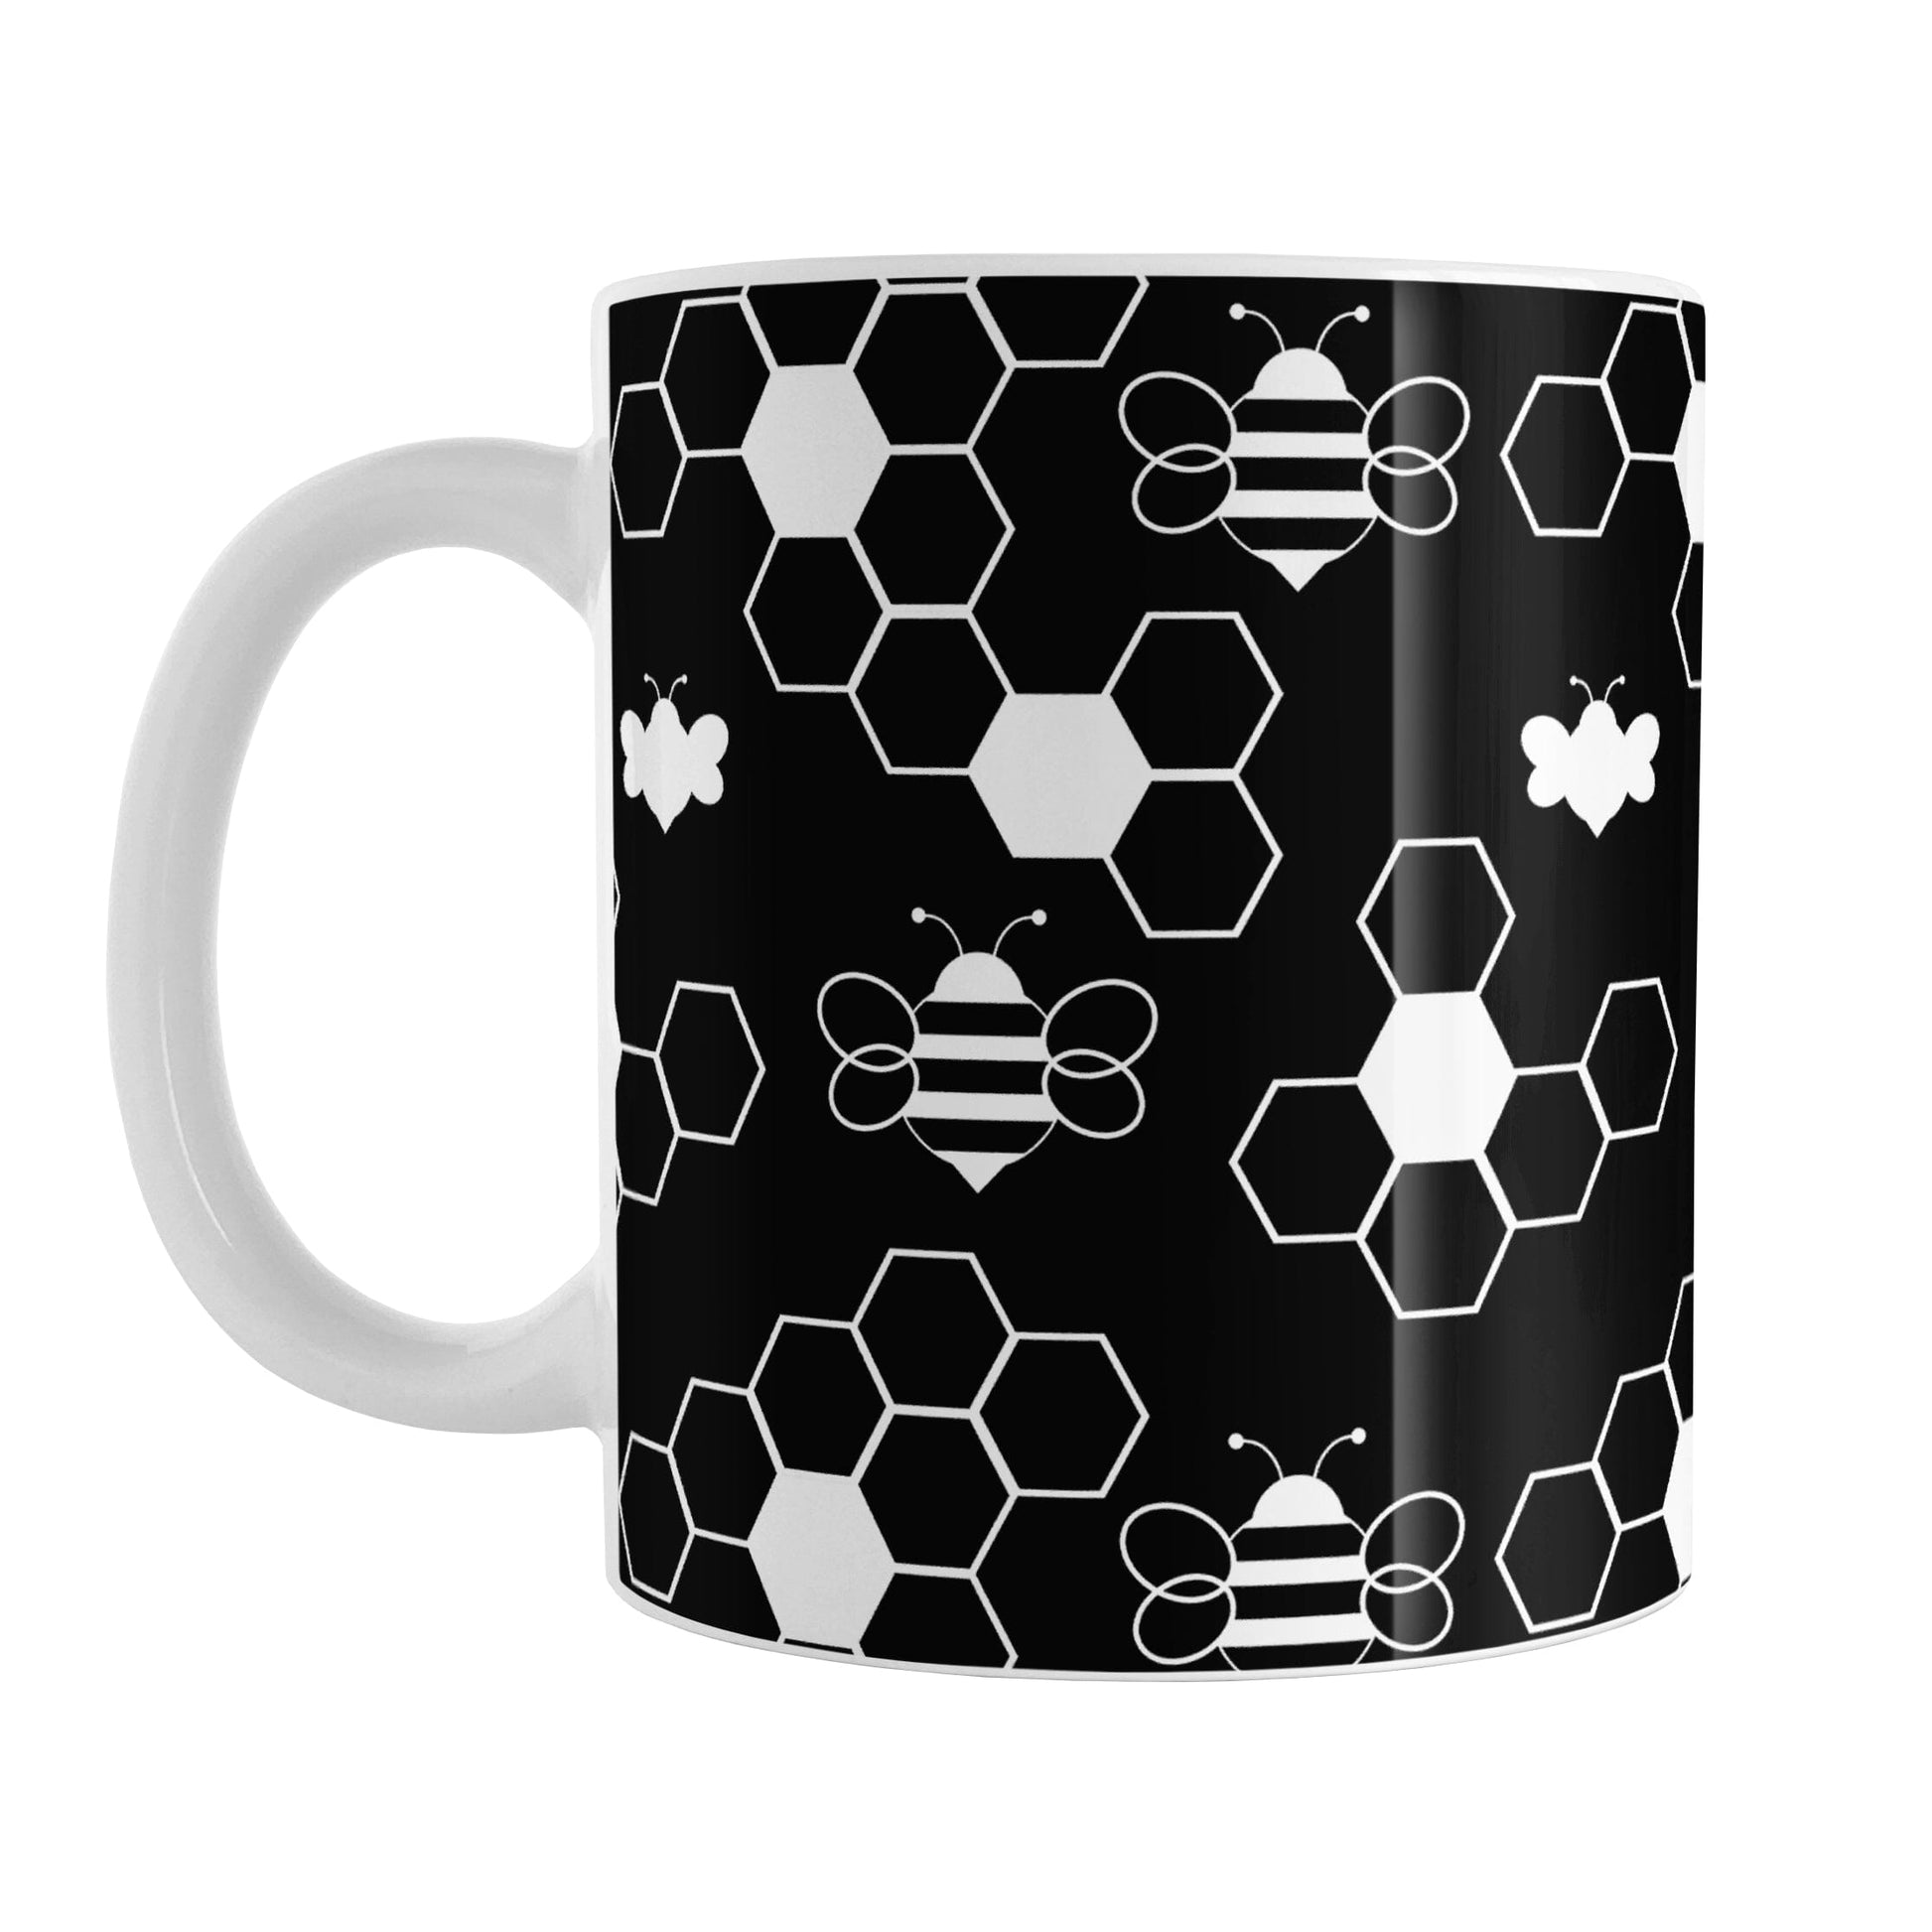 Black and White Bee Mug (11oz) at Amy's Coffee Mugs. A ceramic coffee mug designed with white line and silhouette bees and honeycomb in a sleek pattern over a black background color that wraps around the mug up to the handle.